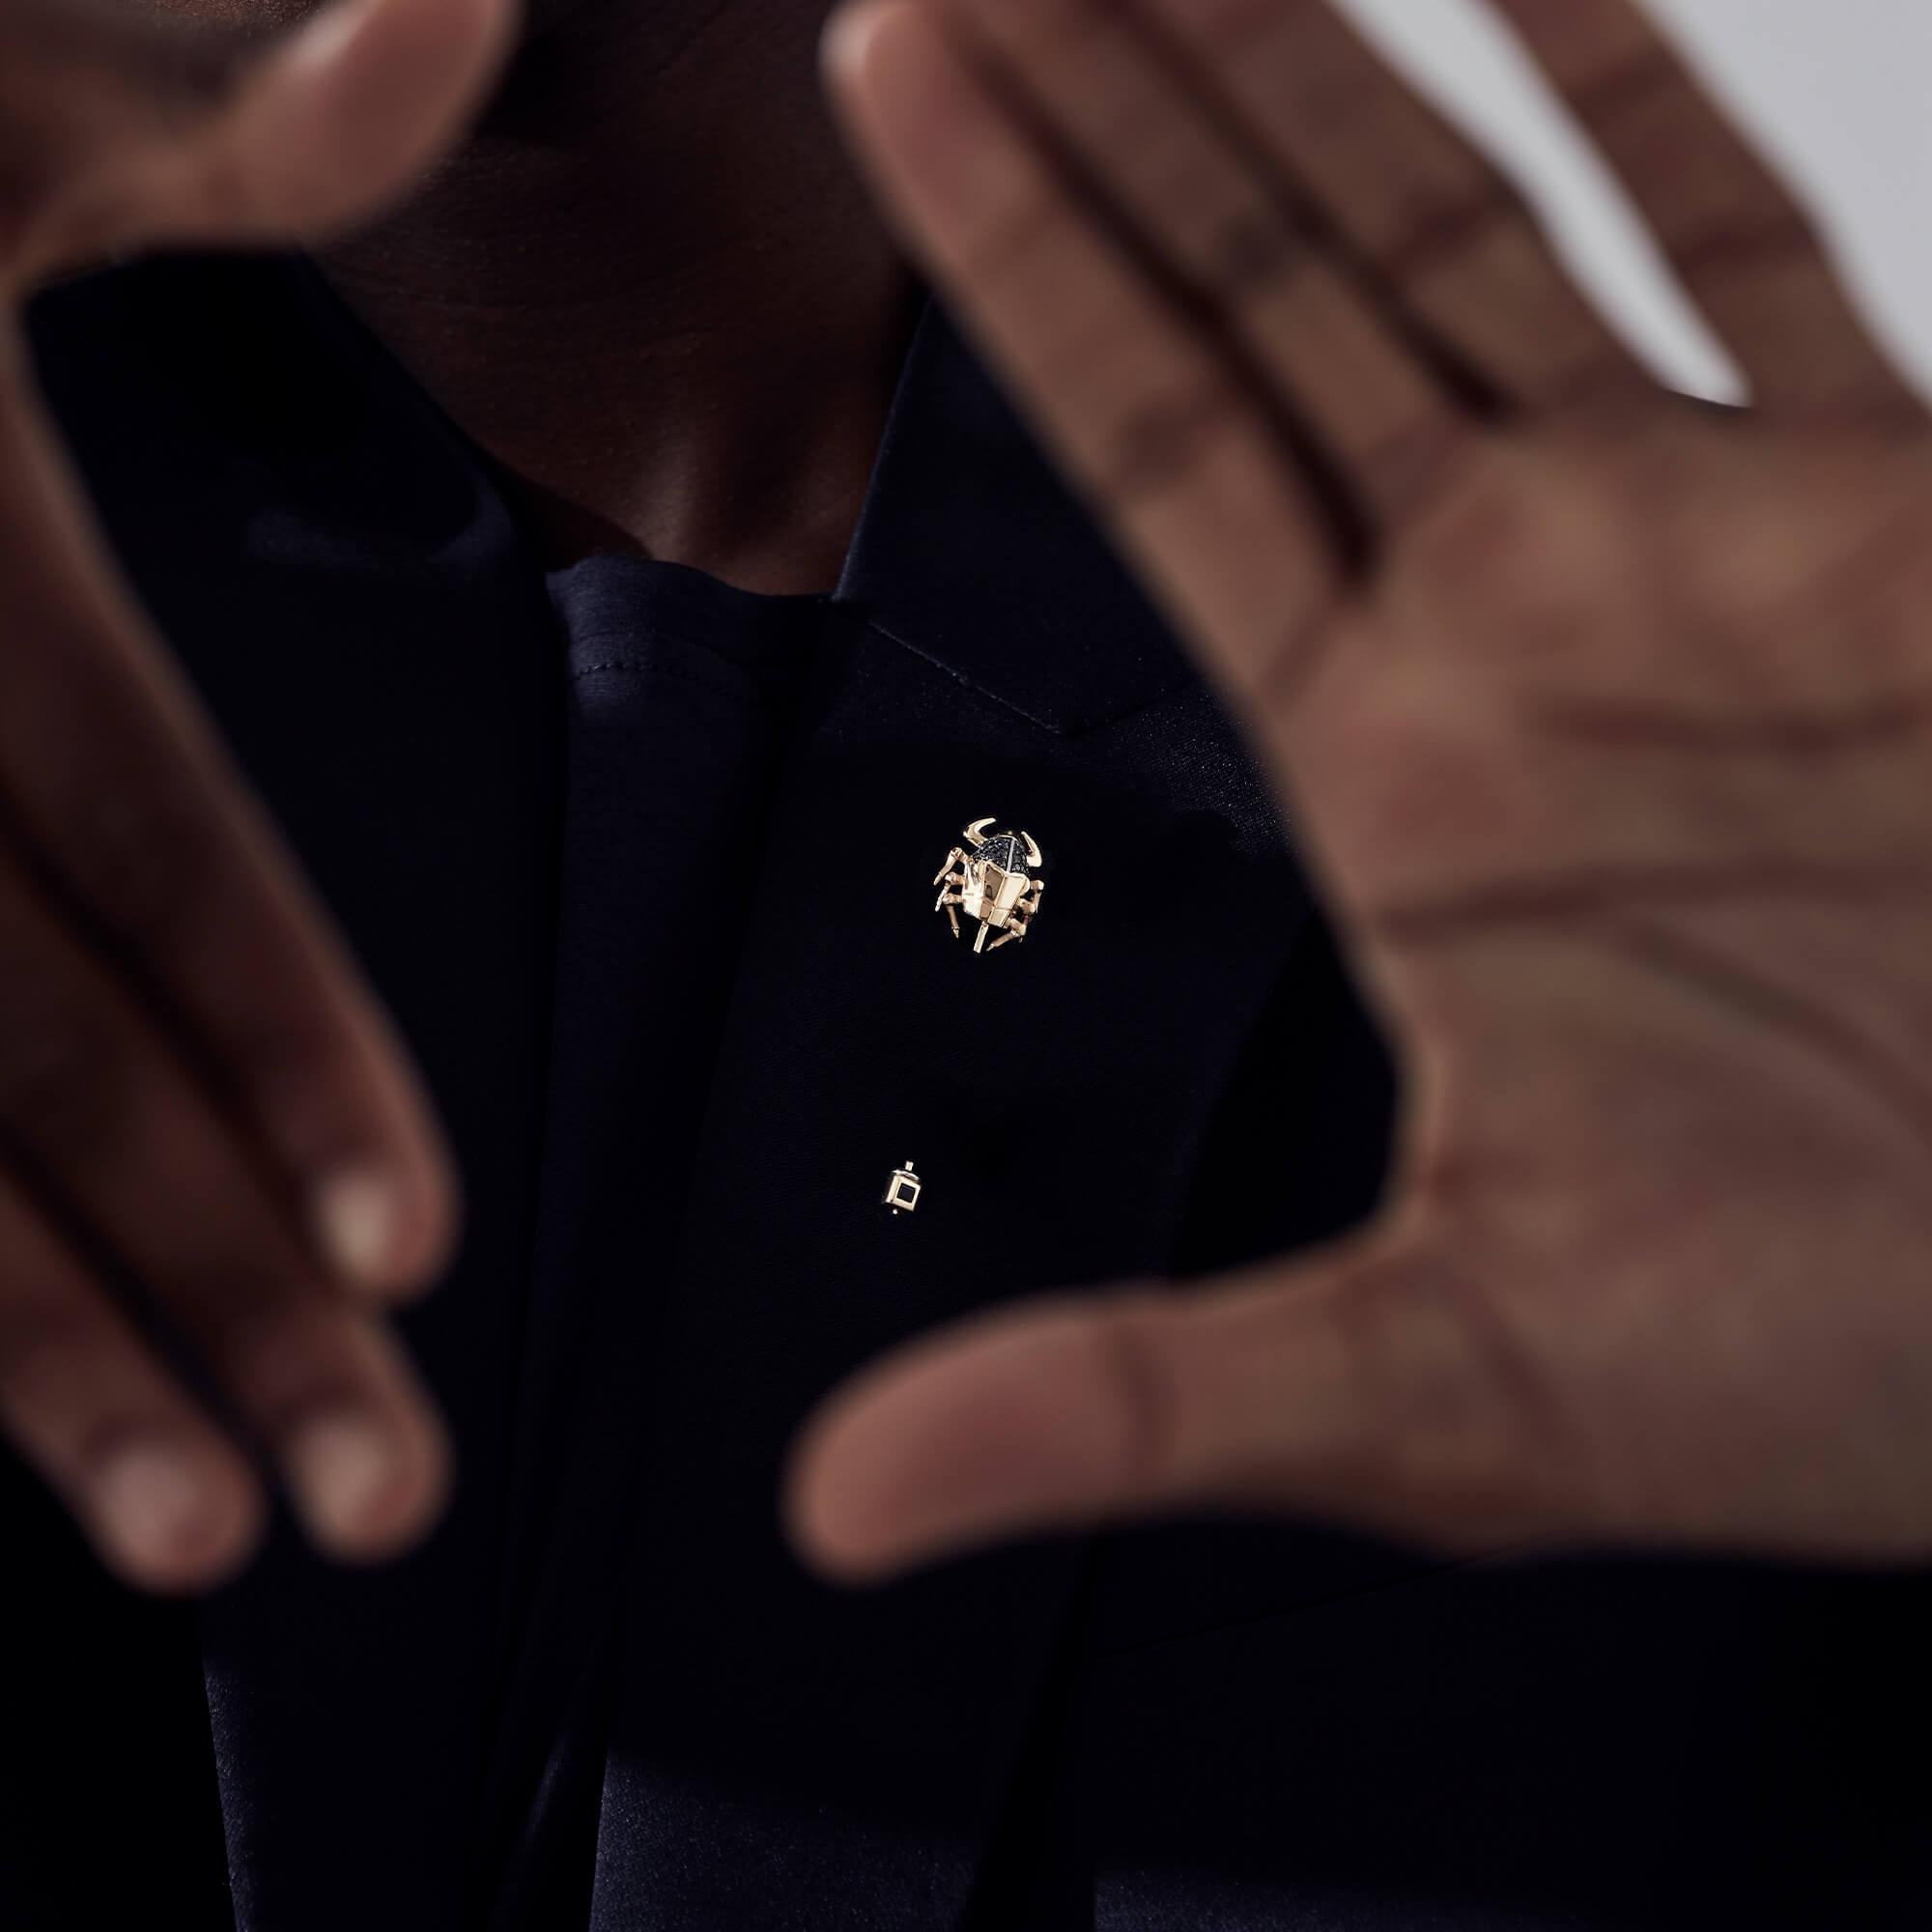 Inspired by our Jitterbug collection, the Jitterbug Toro Beetle Lapel Pin is a playful take on achieving a stylish finish for a polished look. This elegant pin features black Diamond pavé (0.15ct) and black Spinel (0.10ct) set in 18ct yellow